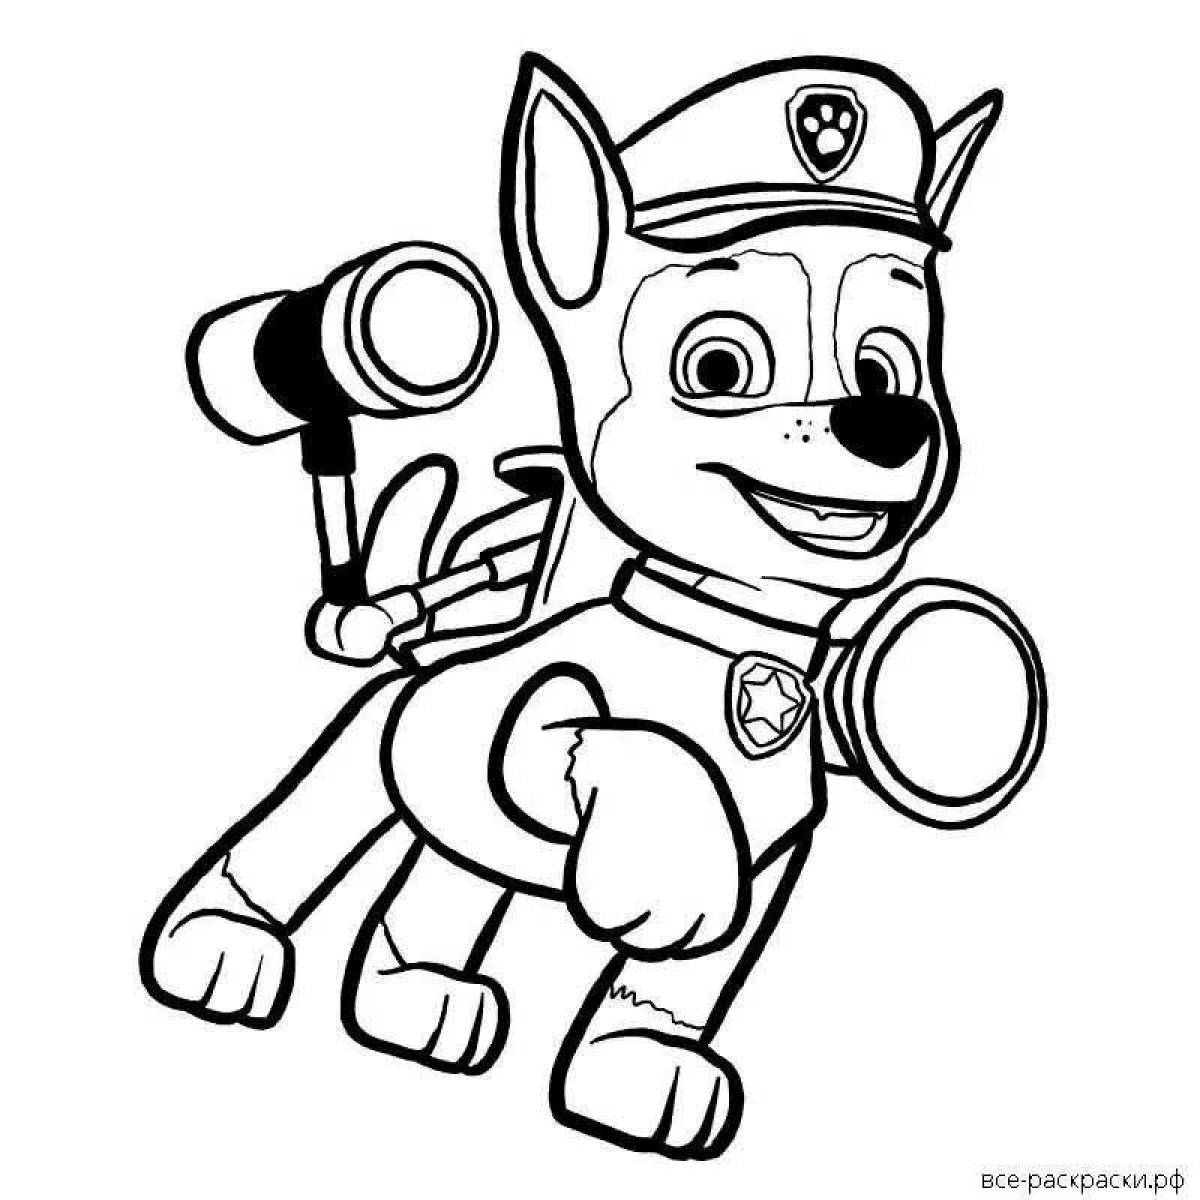 Coloring page attractive racer